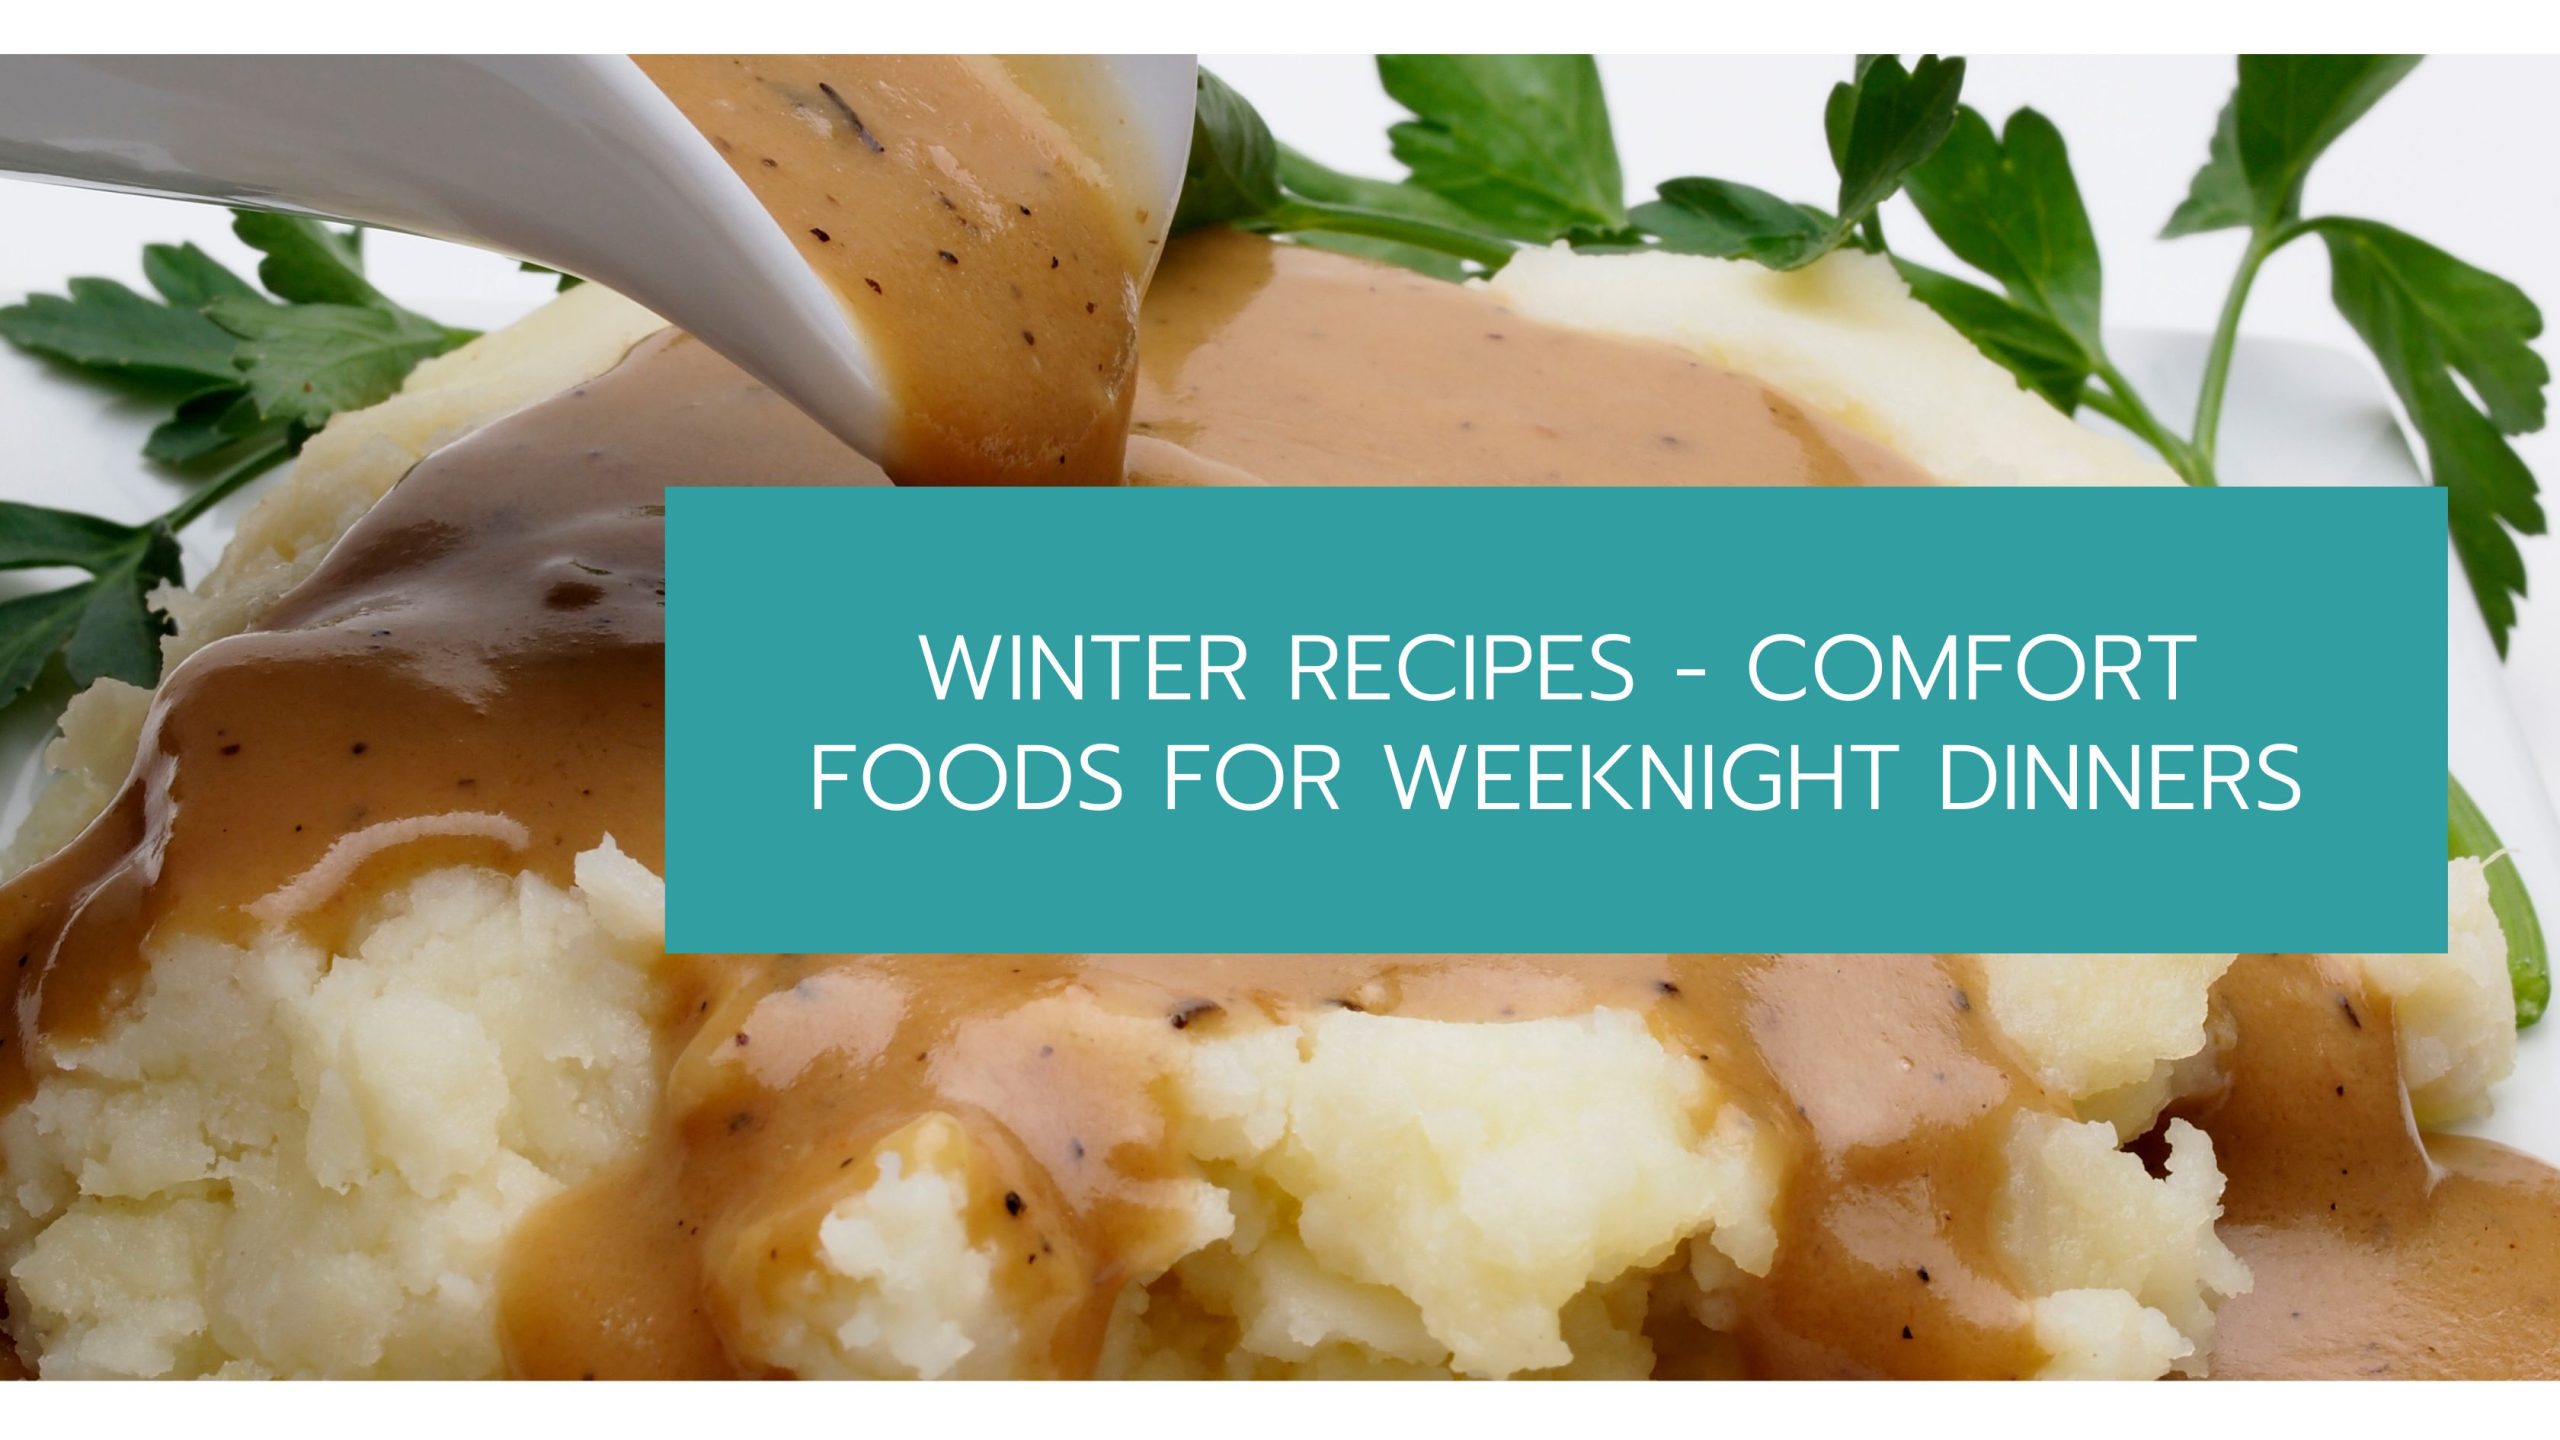 Winter Recipes - Comfort Foods for Weeknight Dinners